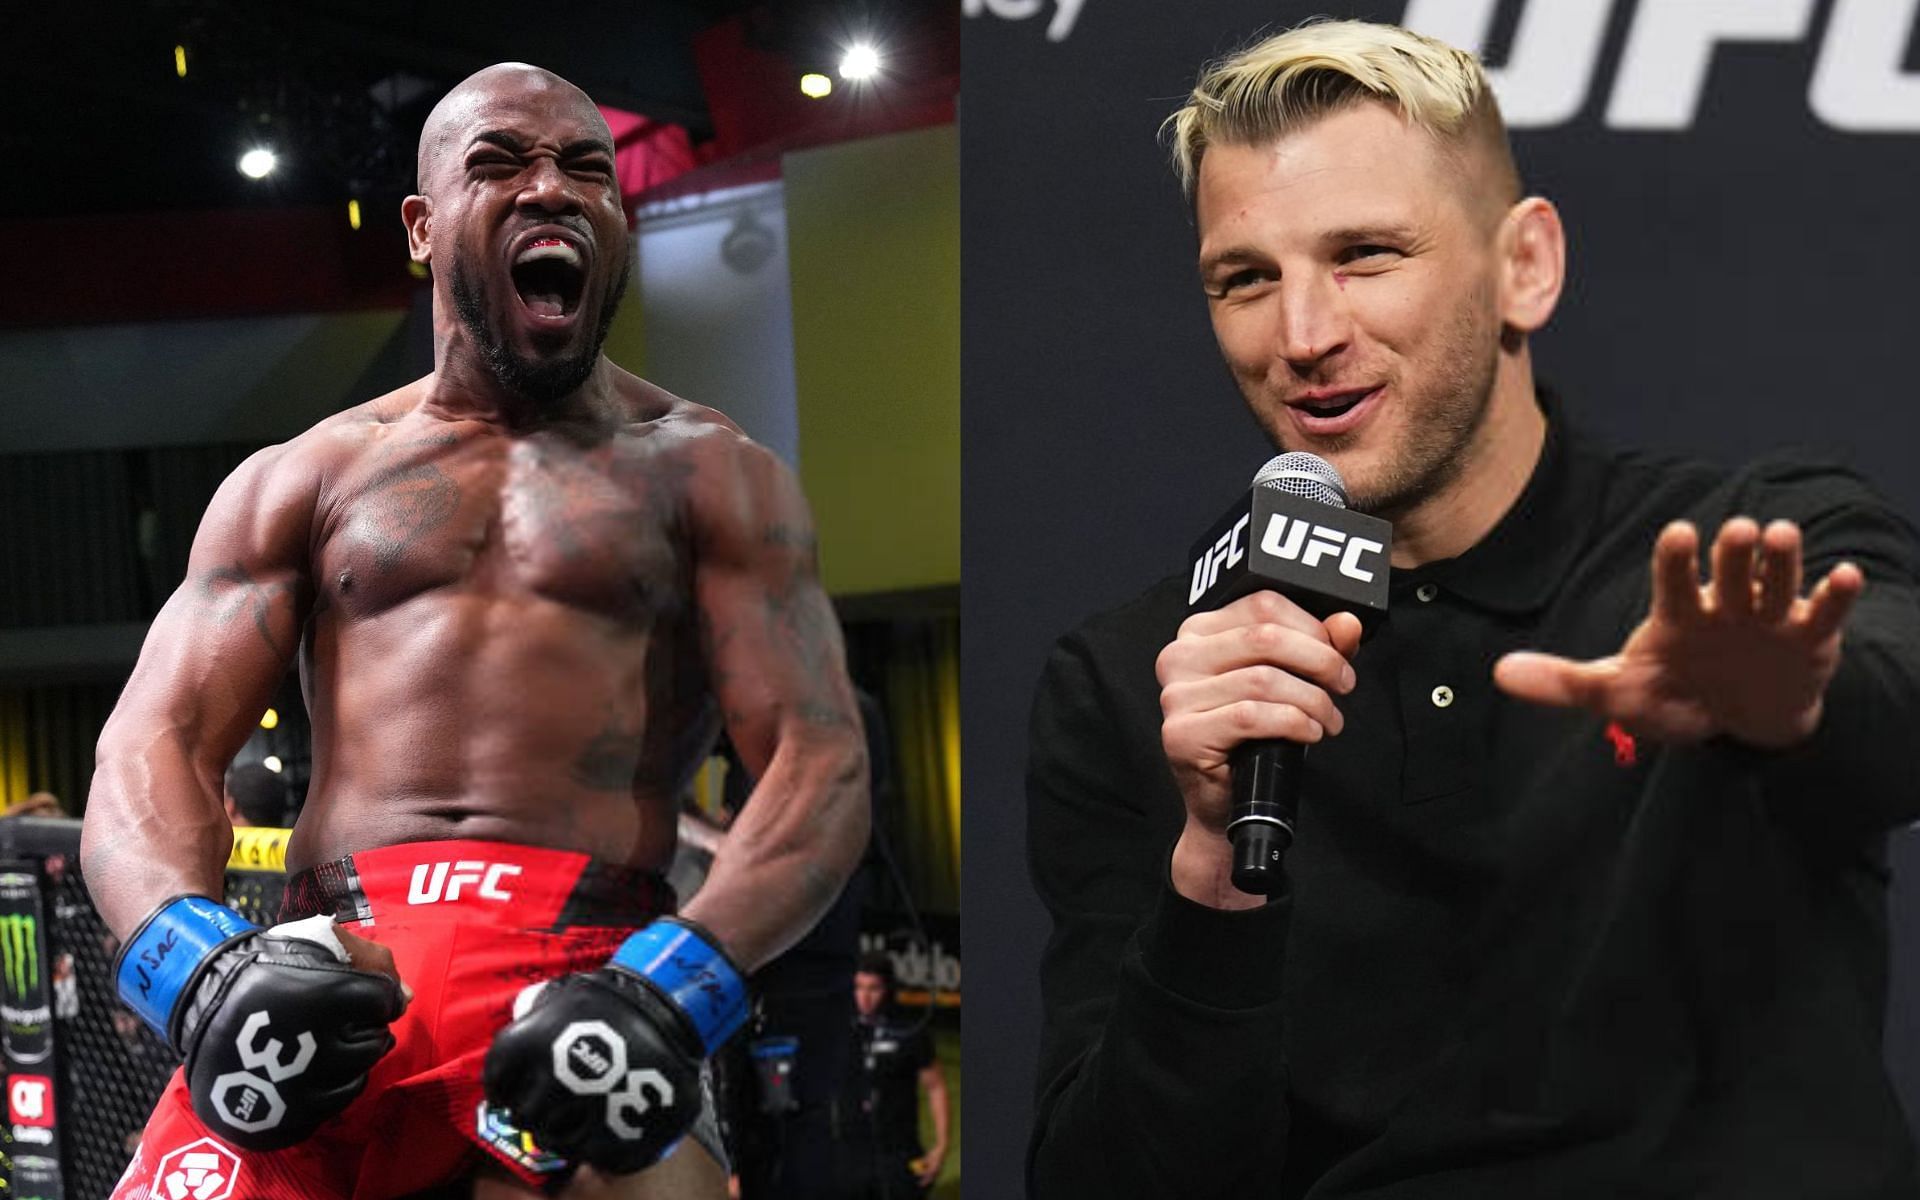 Booby green (left) and Dan Hooker (right) [Images Courtesy: @GettyImages]